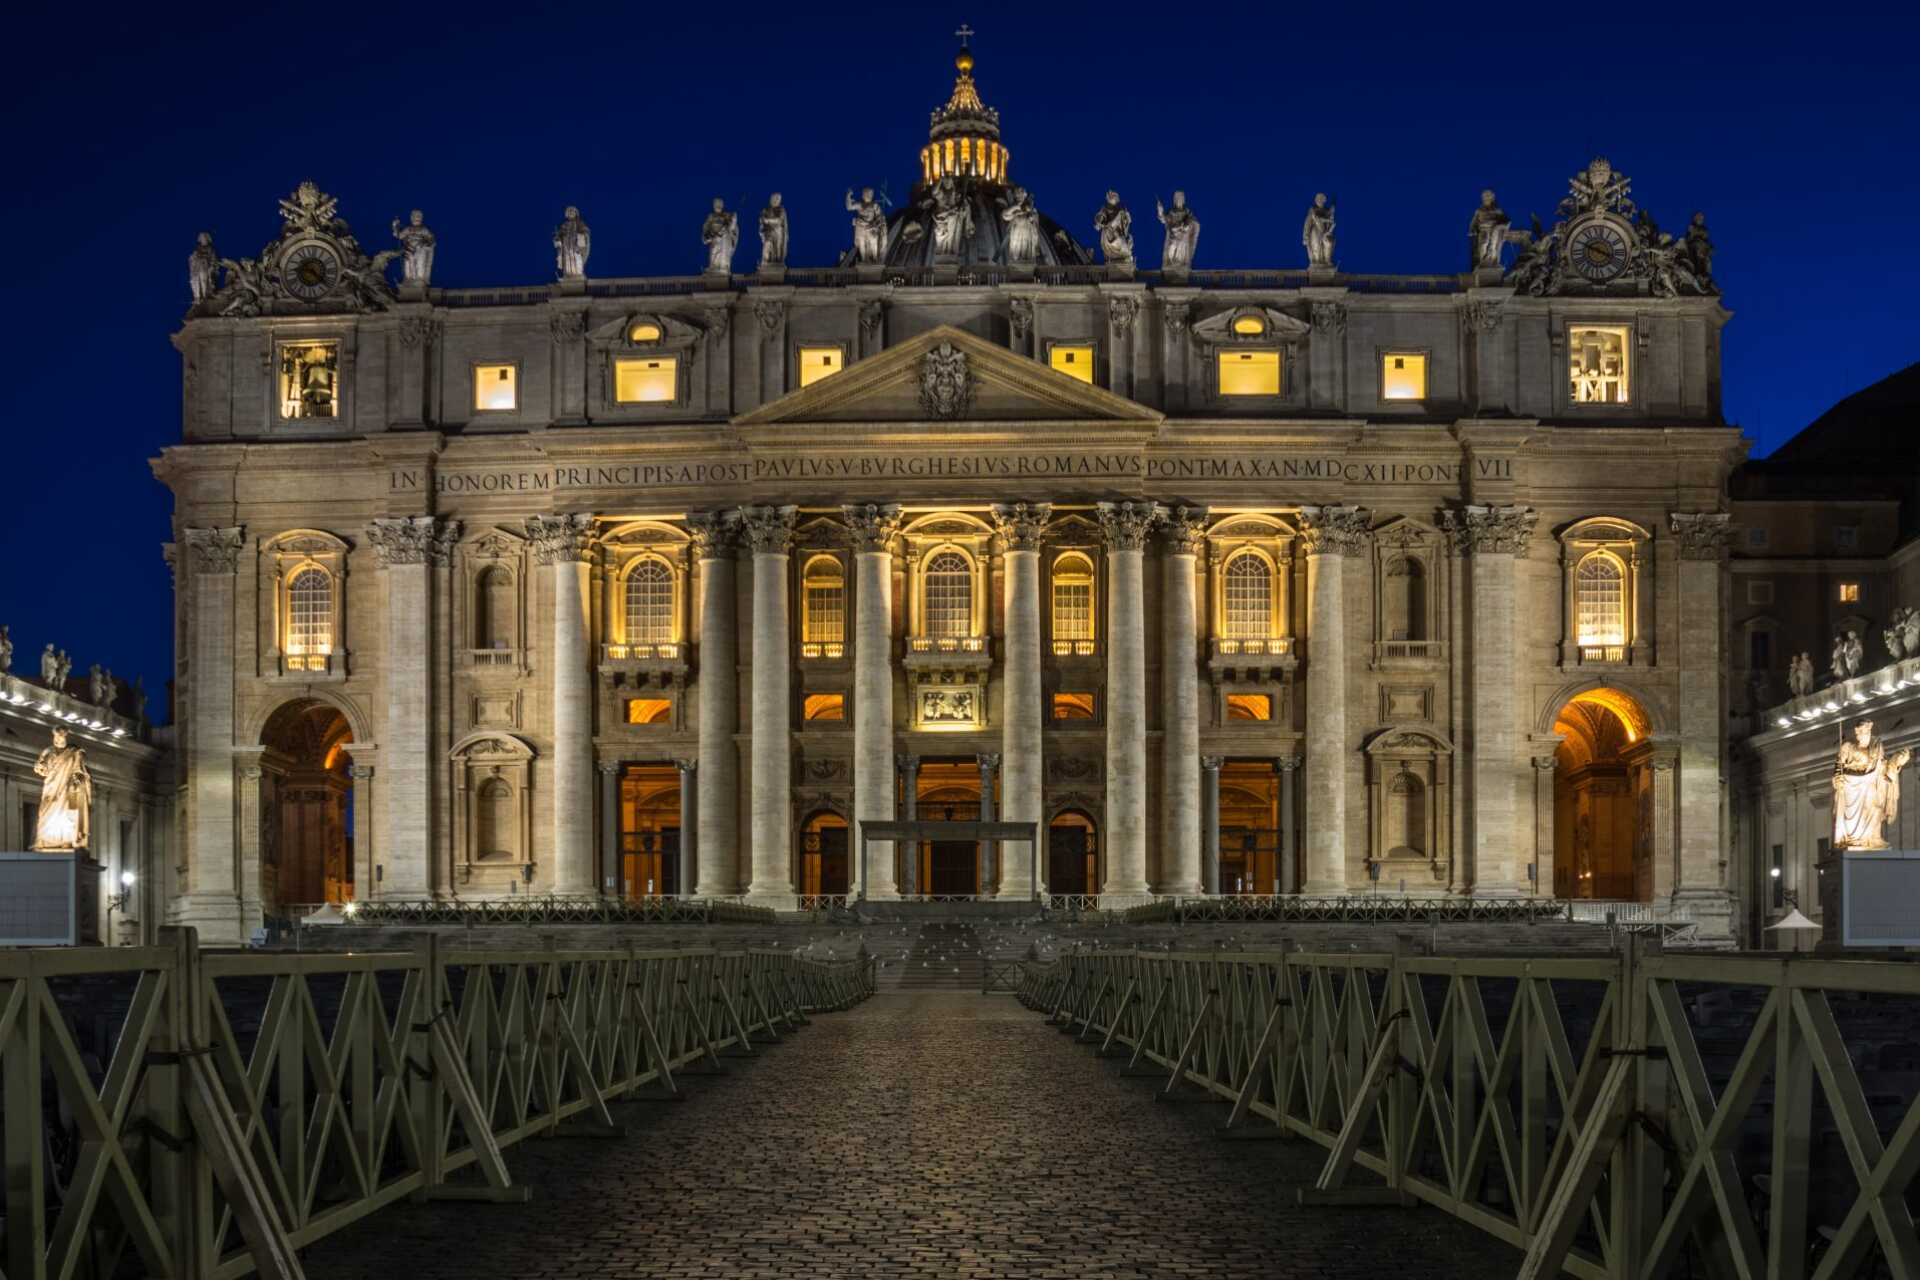 St Peter's Basilica, lit up at night